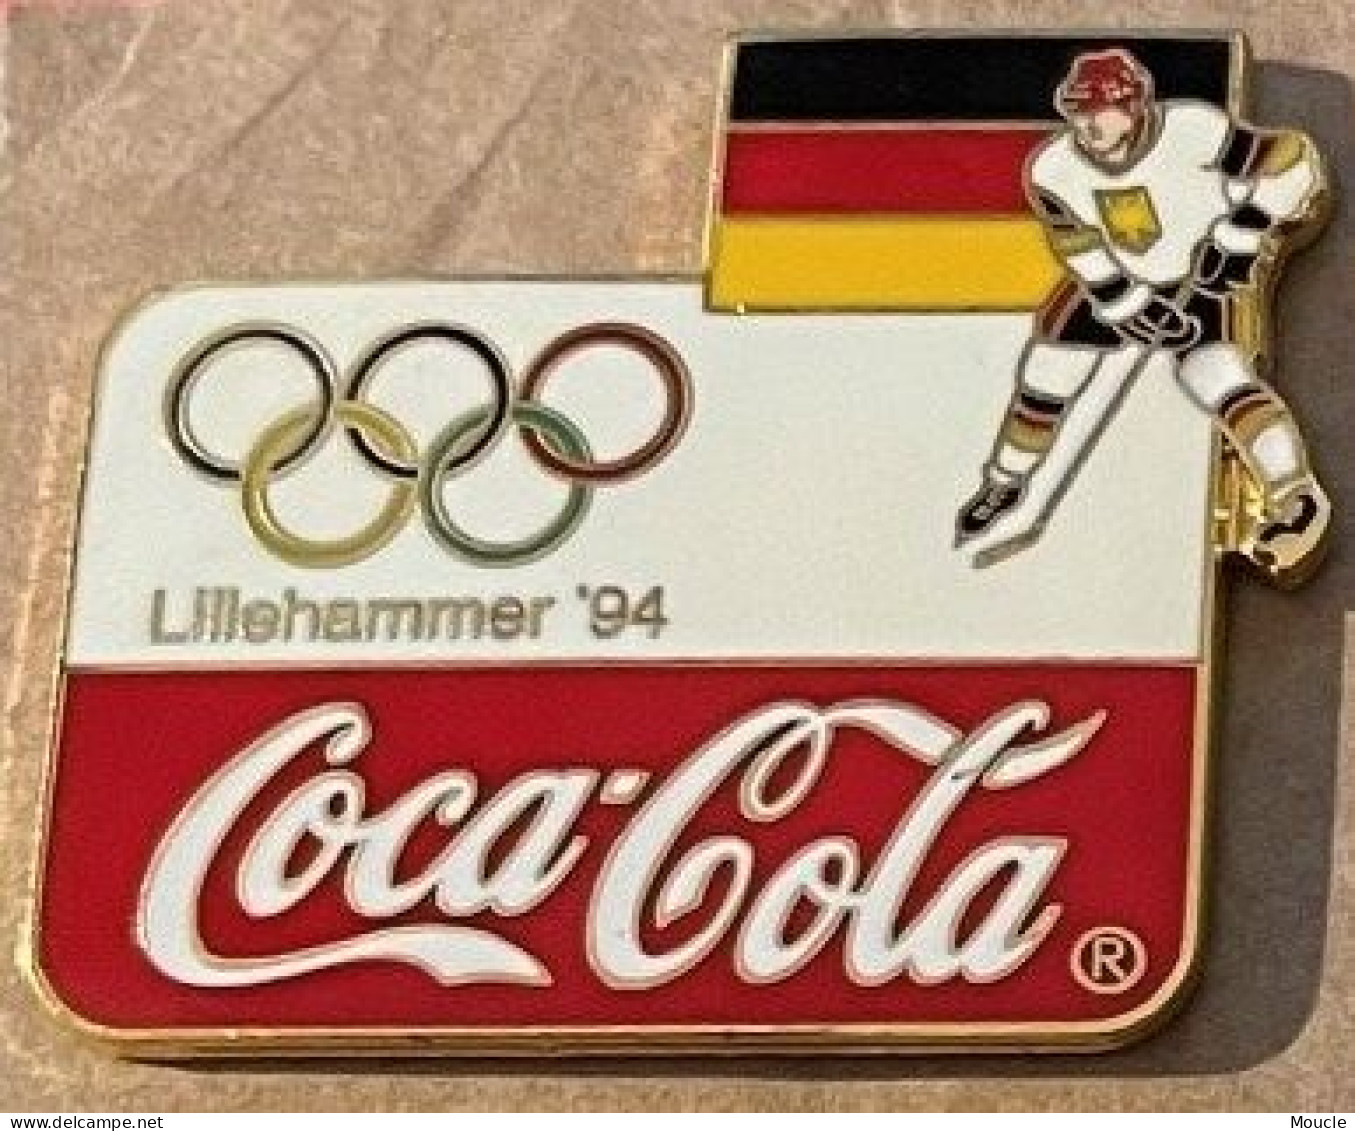 JEUX OLYMPIQUES - OLYMPICS GAMES - LILLEHAMMER '94 - COCA COLA - HOCKEY SUR GLACE - ALLEMAGNE - DEUTSCHLAND - EGF - (20) - Jeux Olympiques